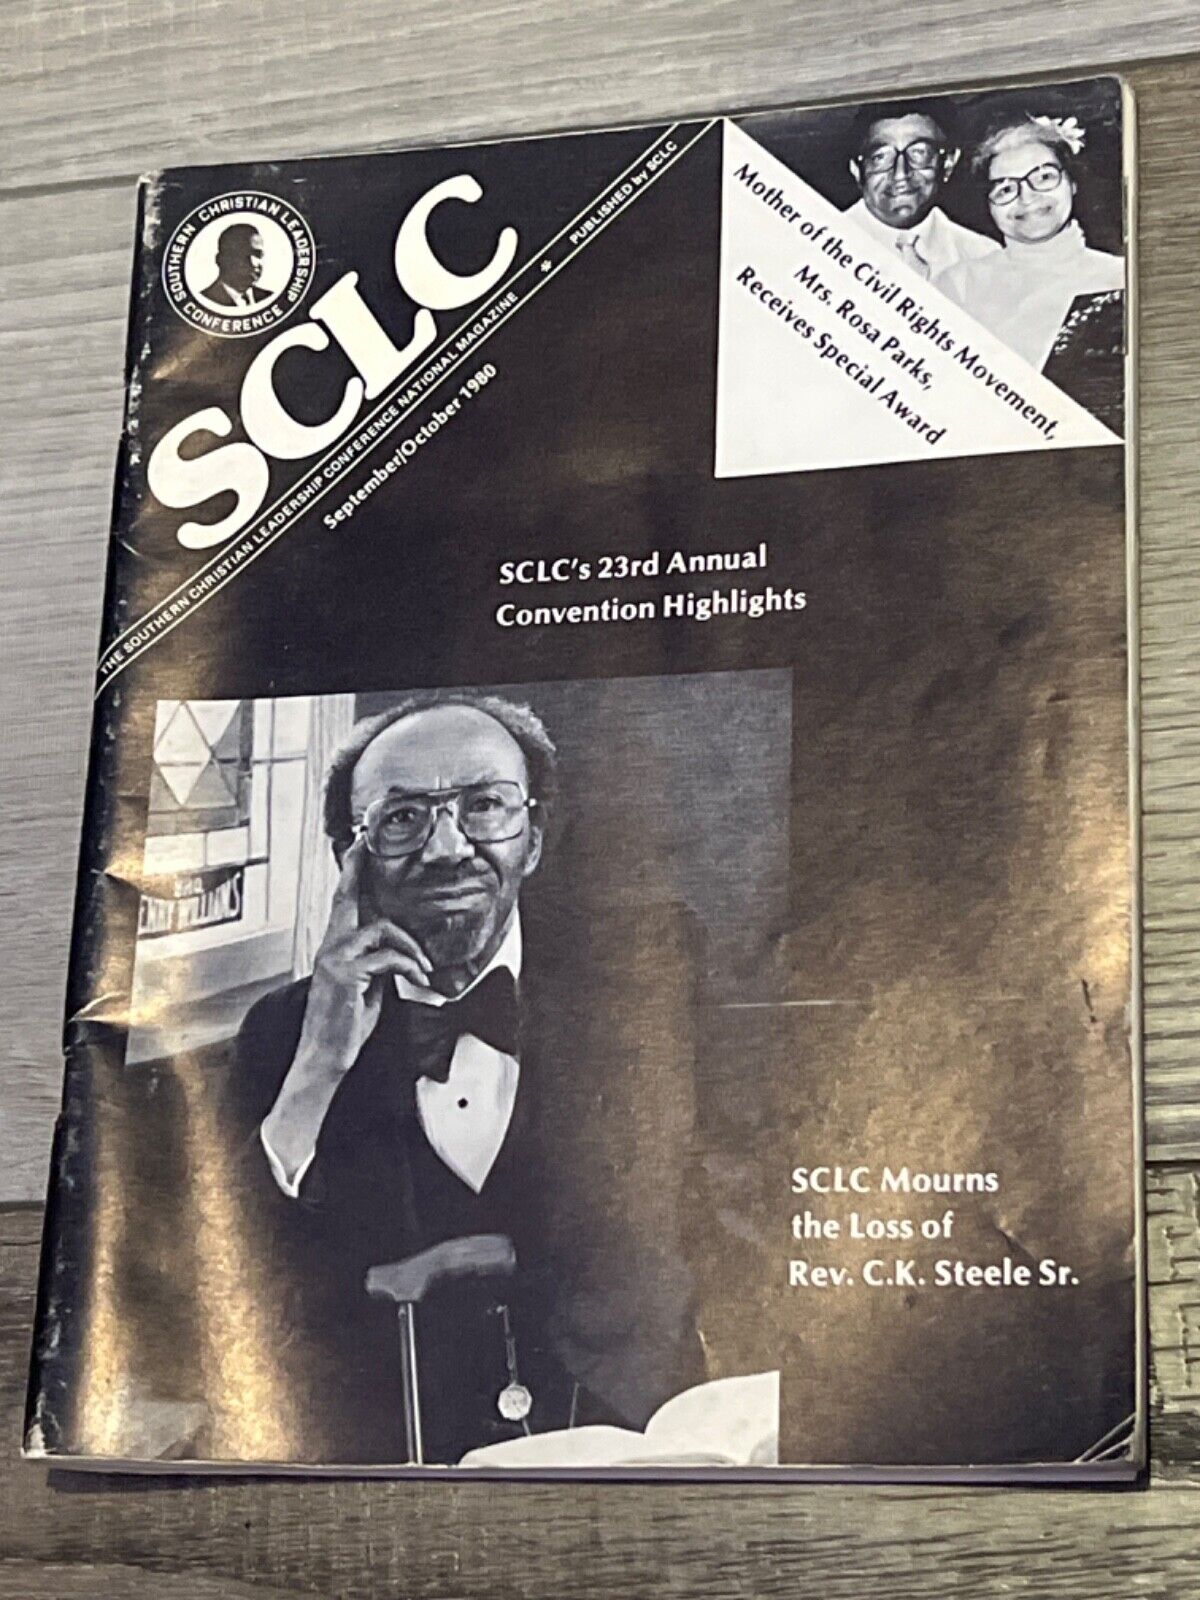 SCLC (Southern Christian Leadership Conference) Magazine Oct 1980